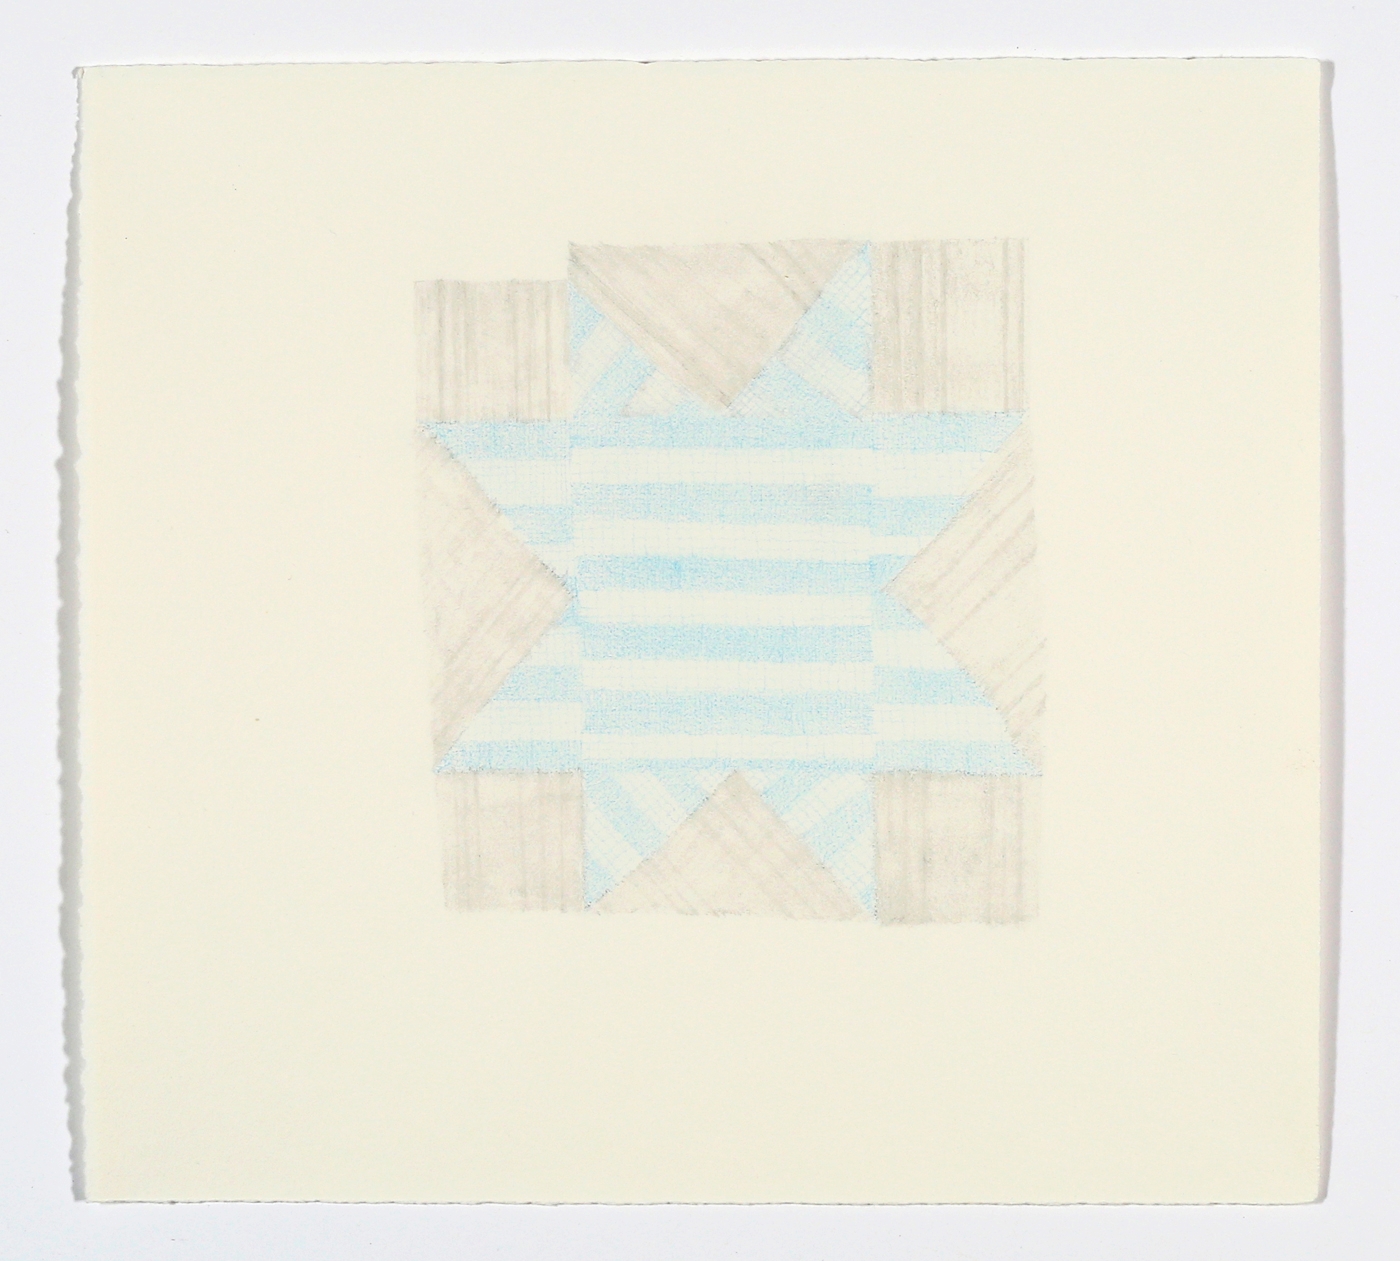  Quilt Square No. 3. 2015. Pencil and Colored Pencil on Paper. 14" x 13" 